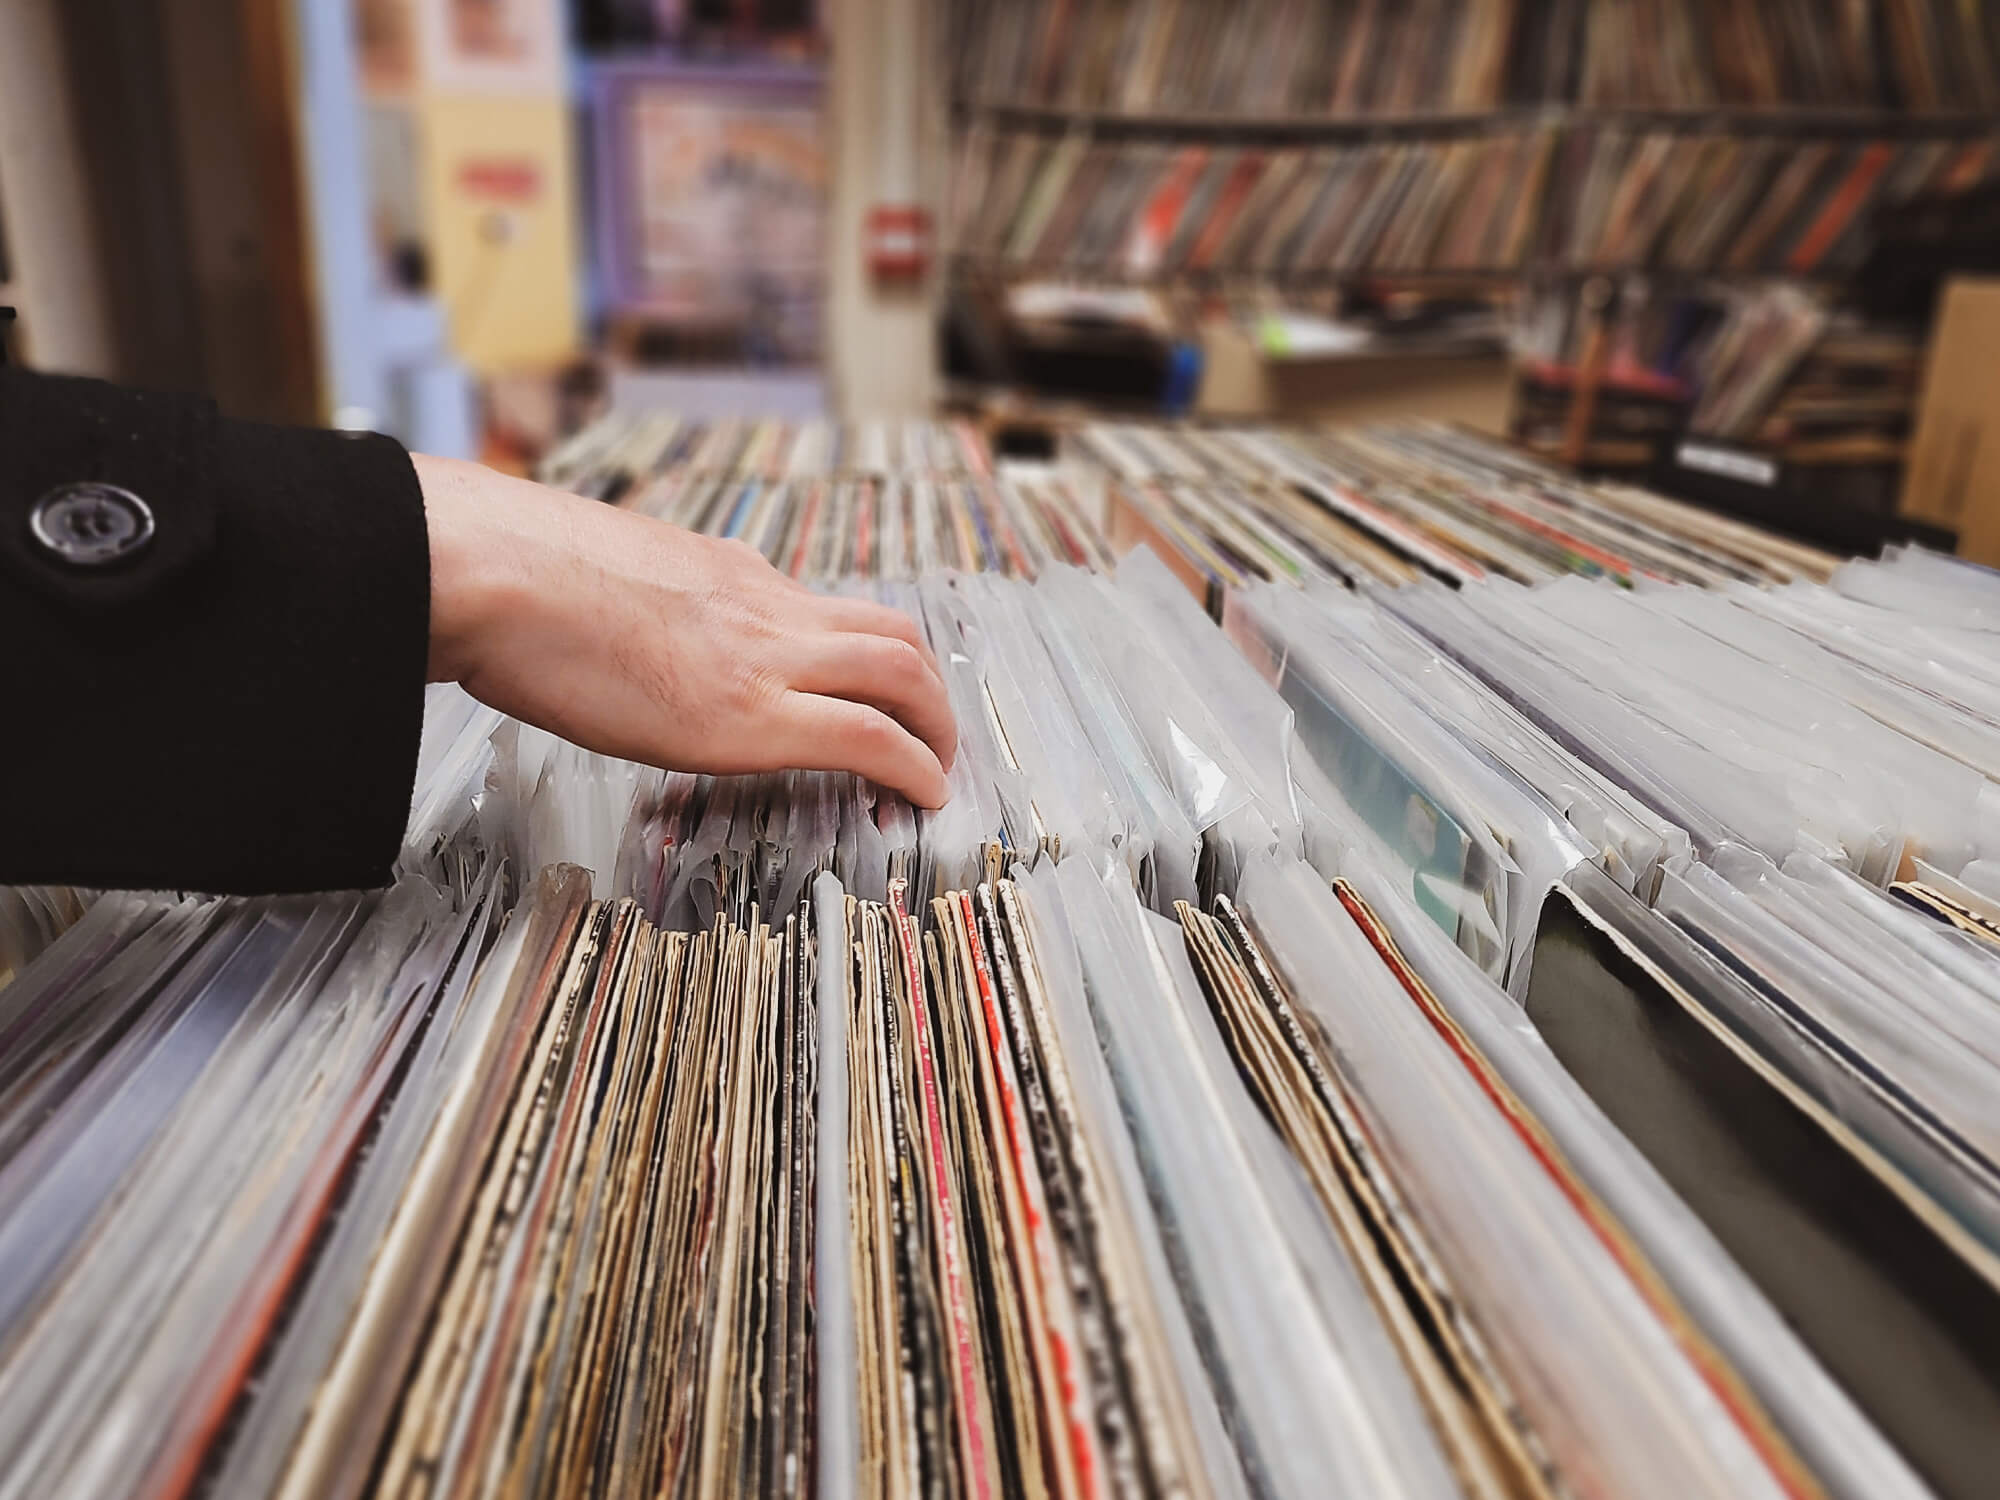 A person's hand flicking through a large collection of vinyl records.